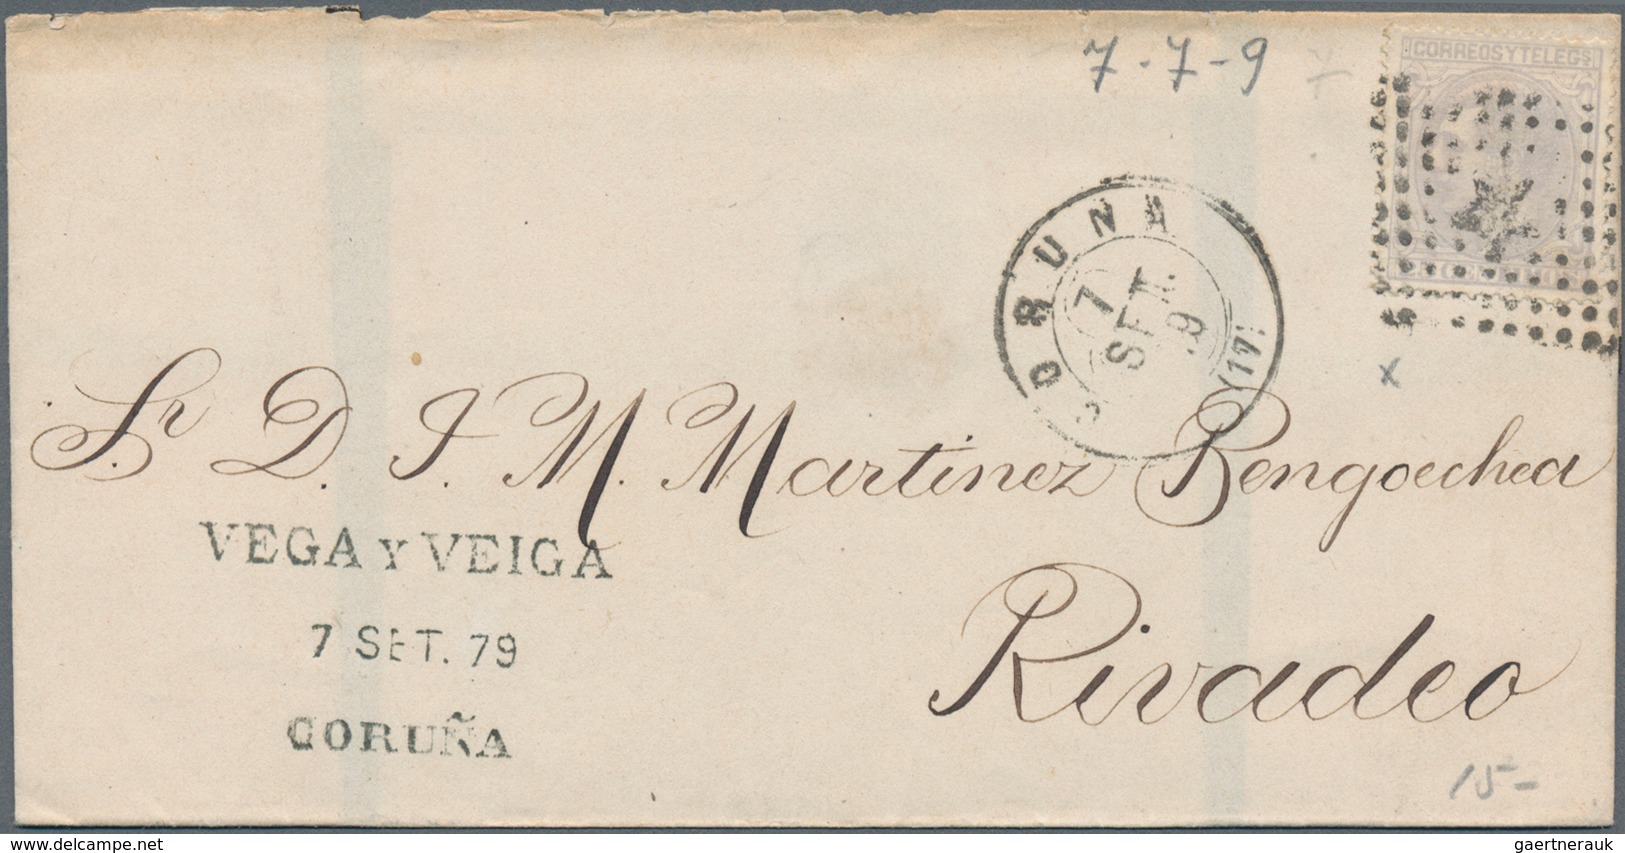 Spanien: 1846/82, mostly folded letters (appr. 210) almost exclusively used inland inc. prephilateli